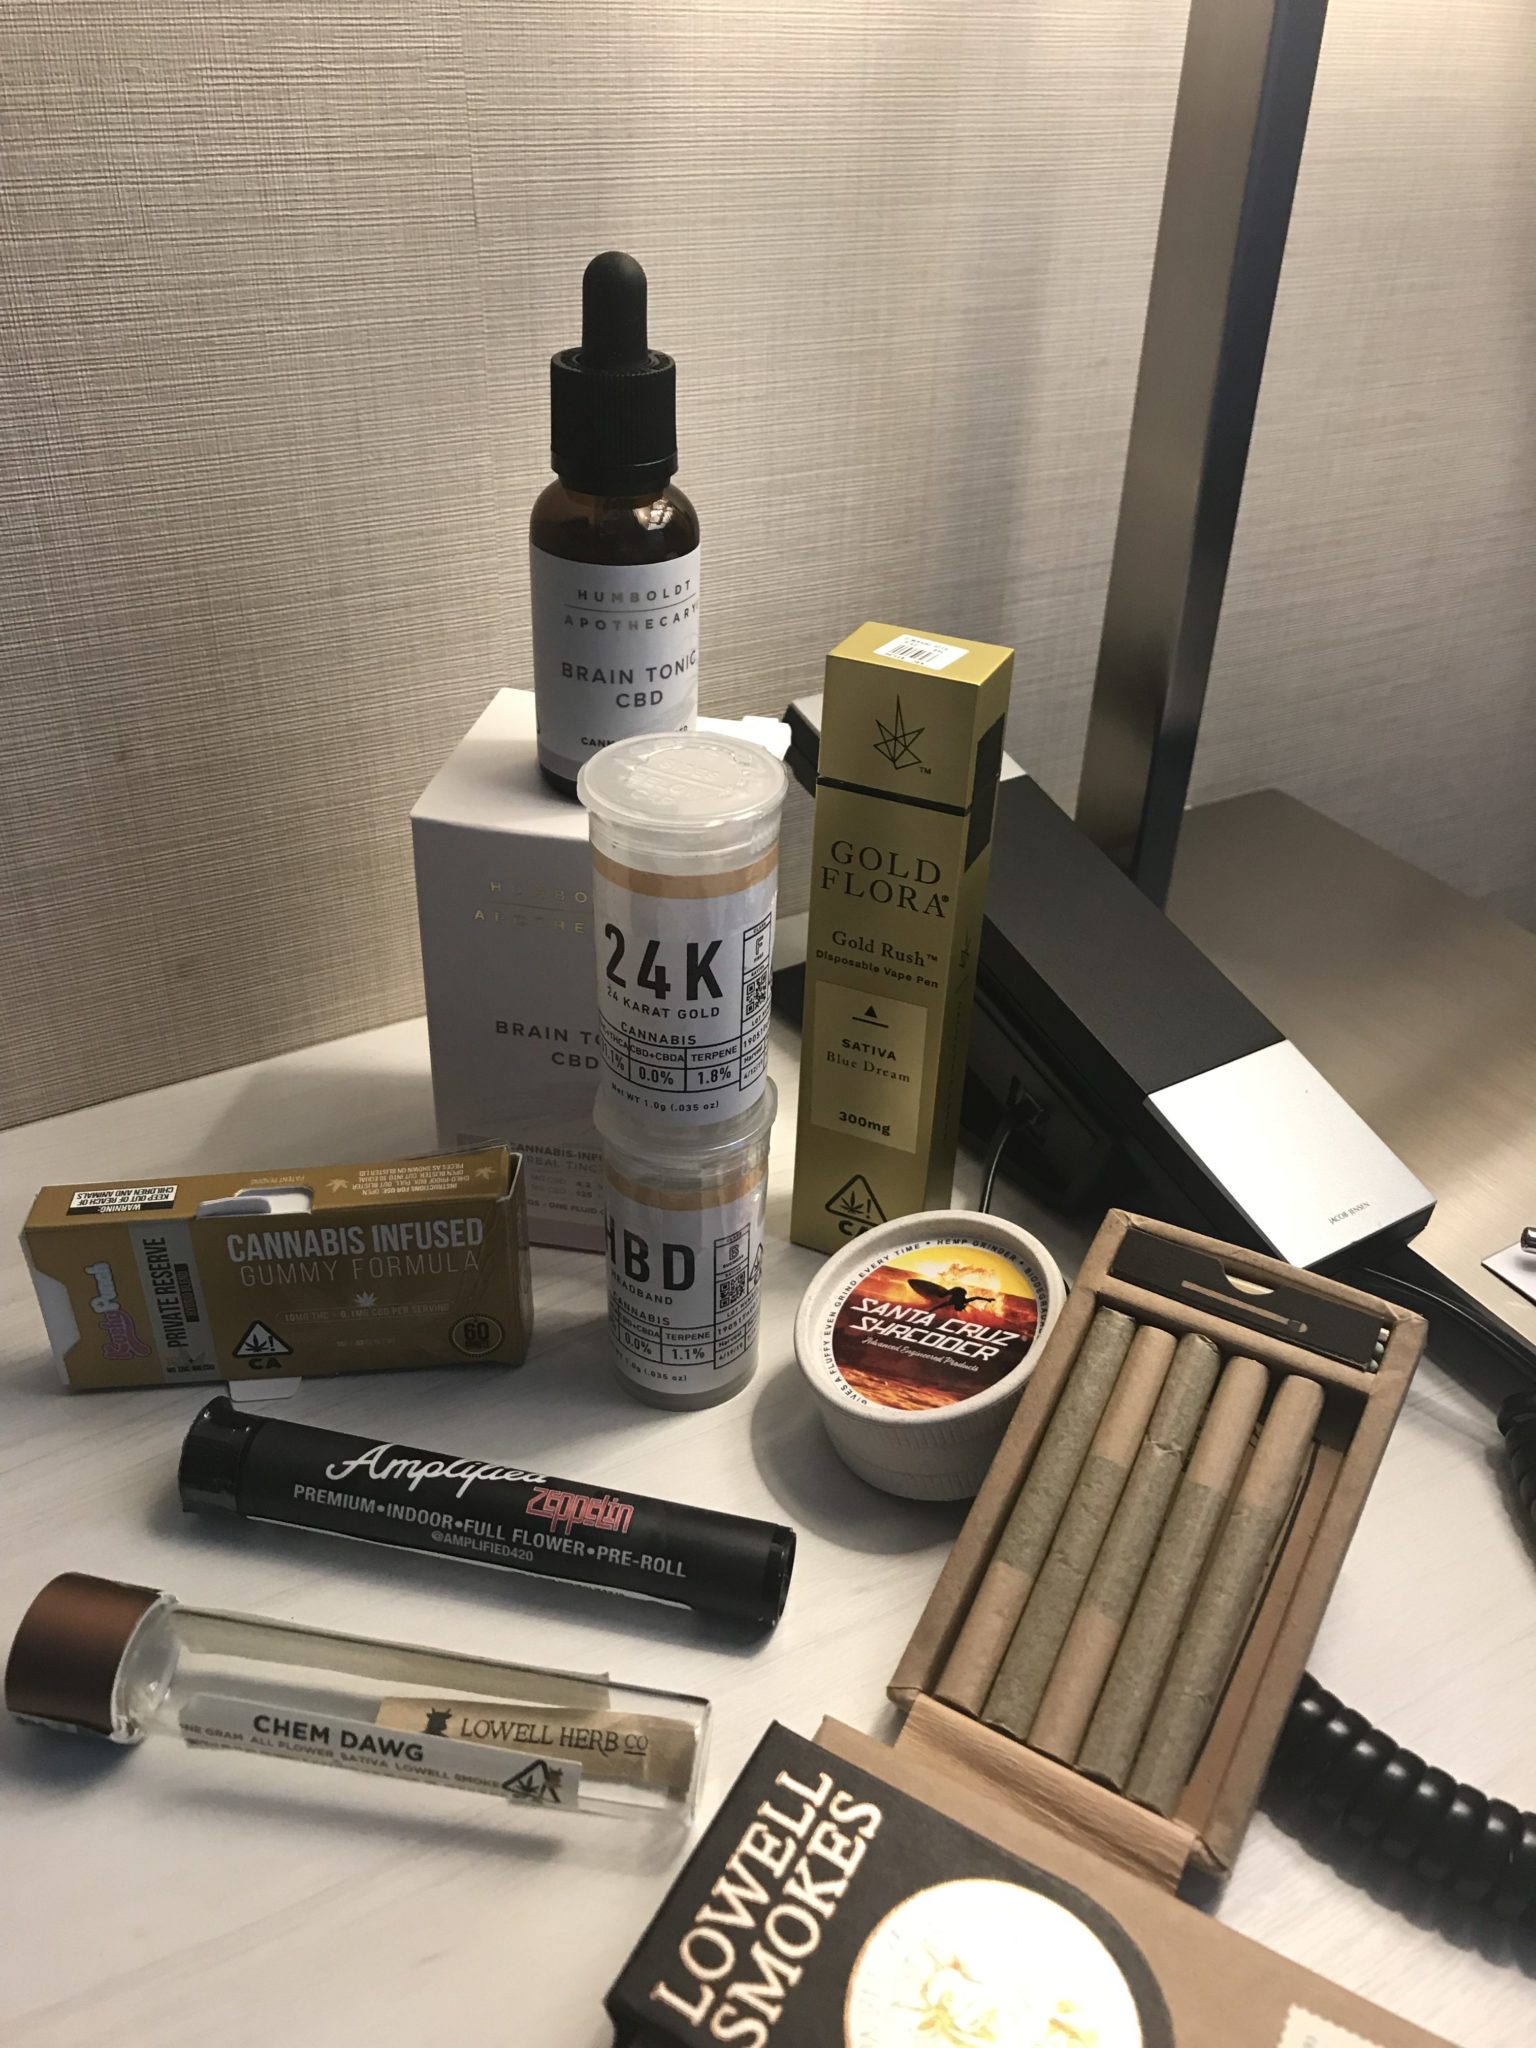 PRODUCT KNOWLEDGE III: CANNABIS PRODUCTS WE TRIED IN CALIFORNIA LAST WEEK